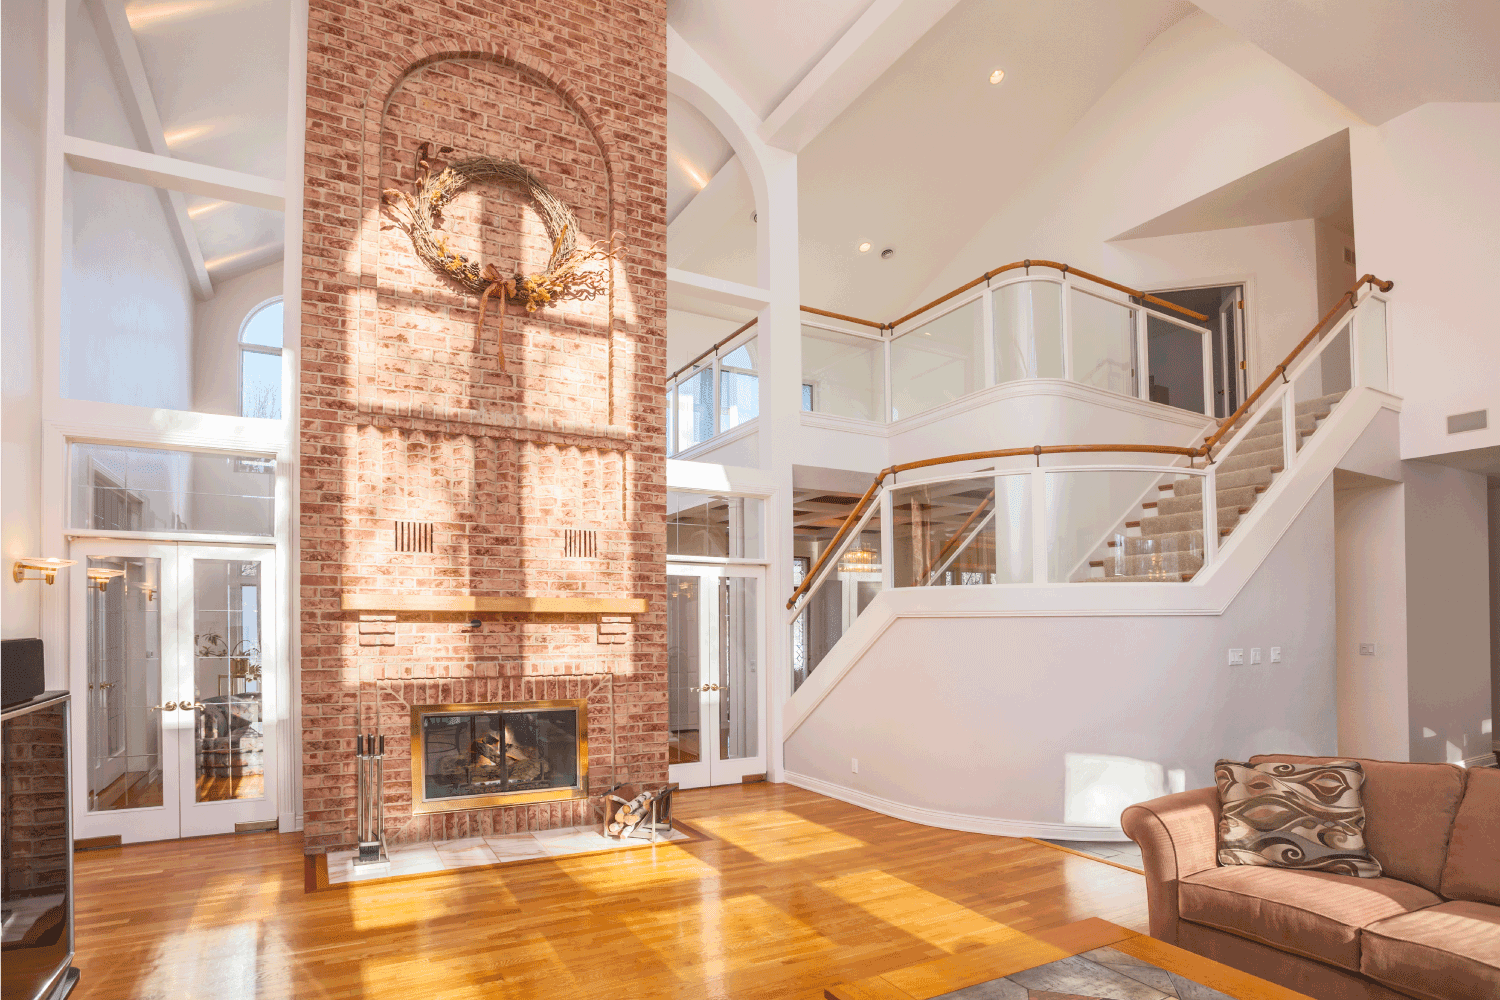 Amazing home interior architecture, cathedral ceiling with brick fireplace and spectacular glass staircase